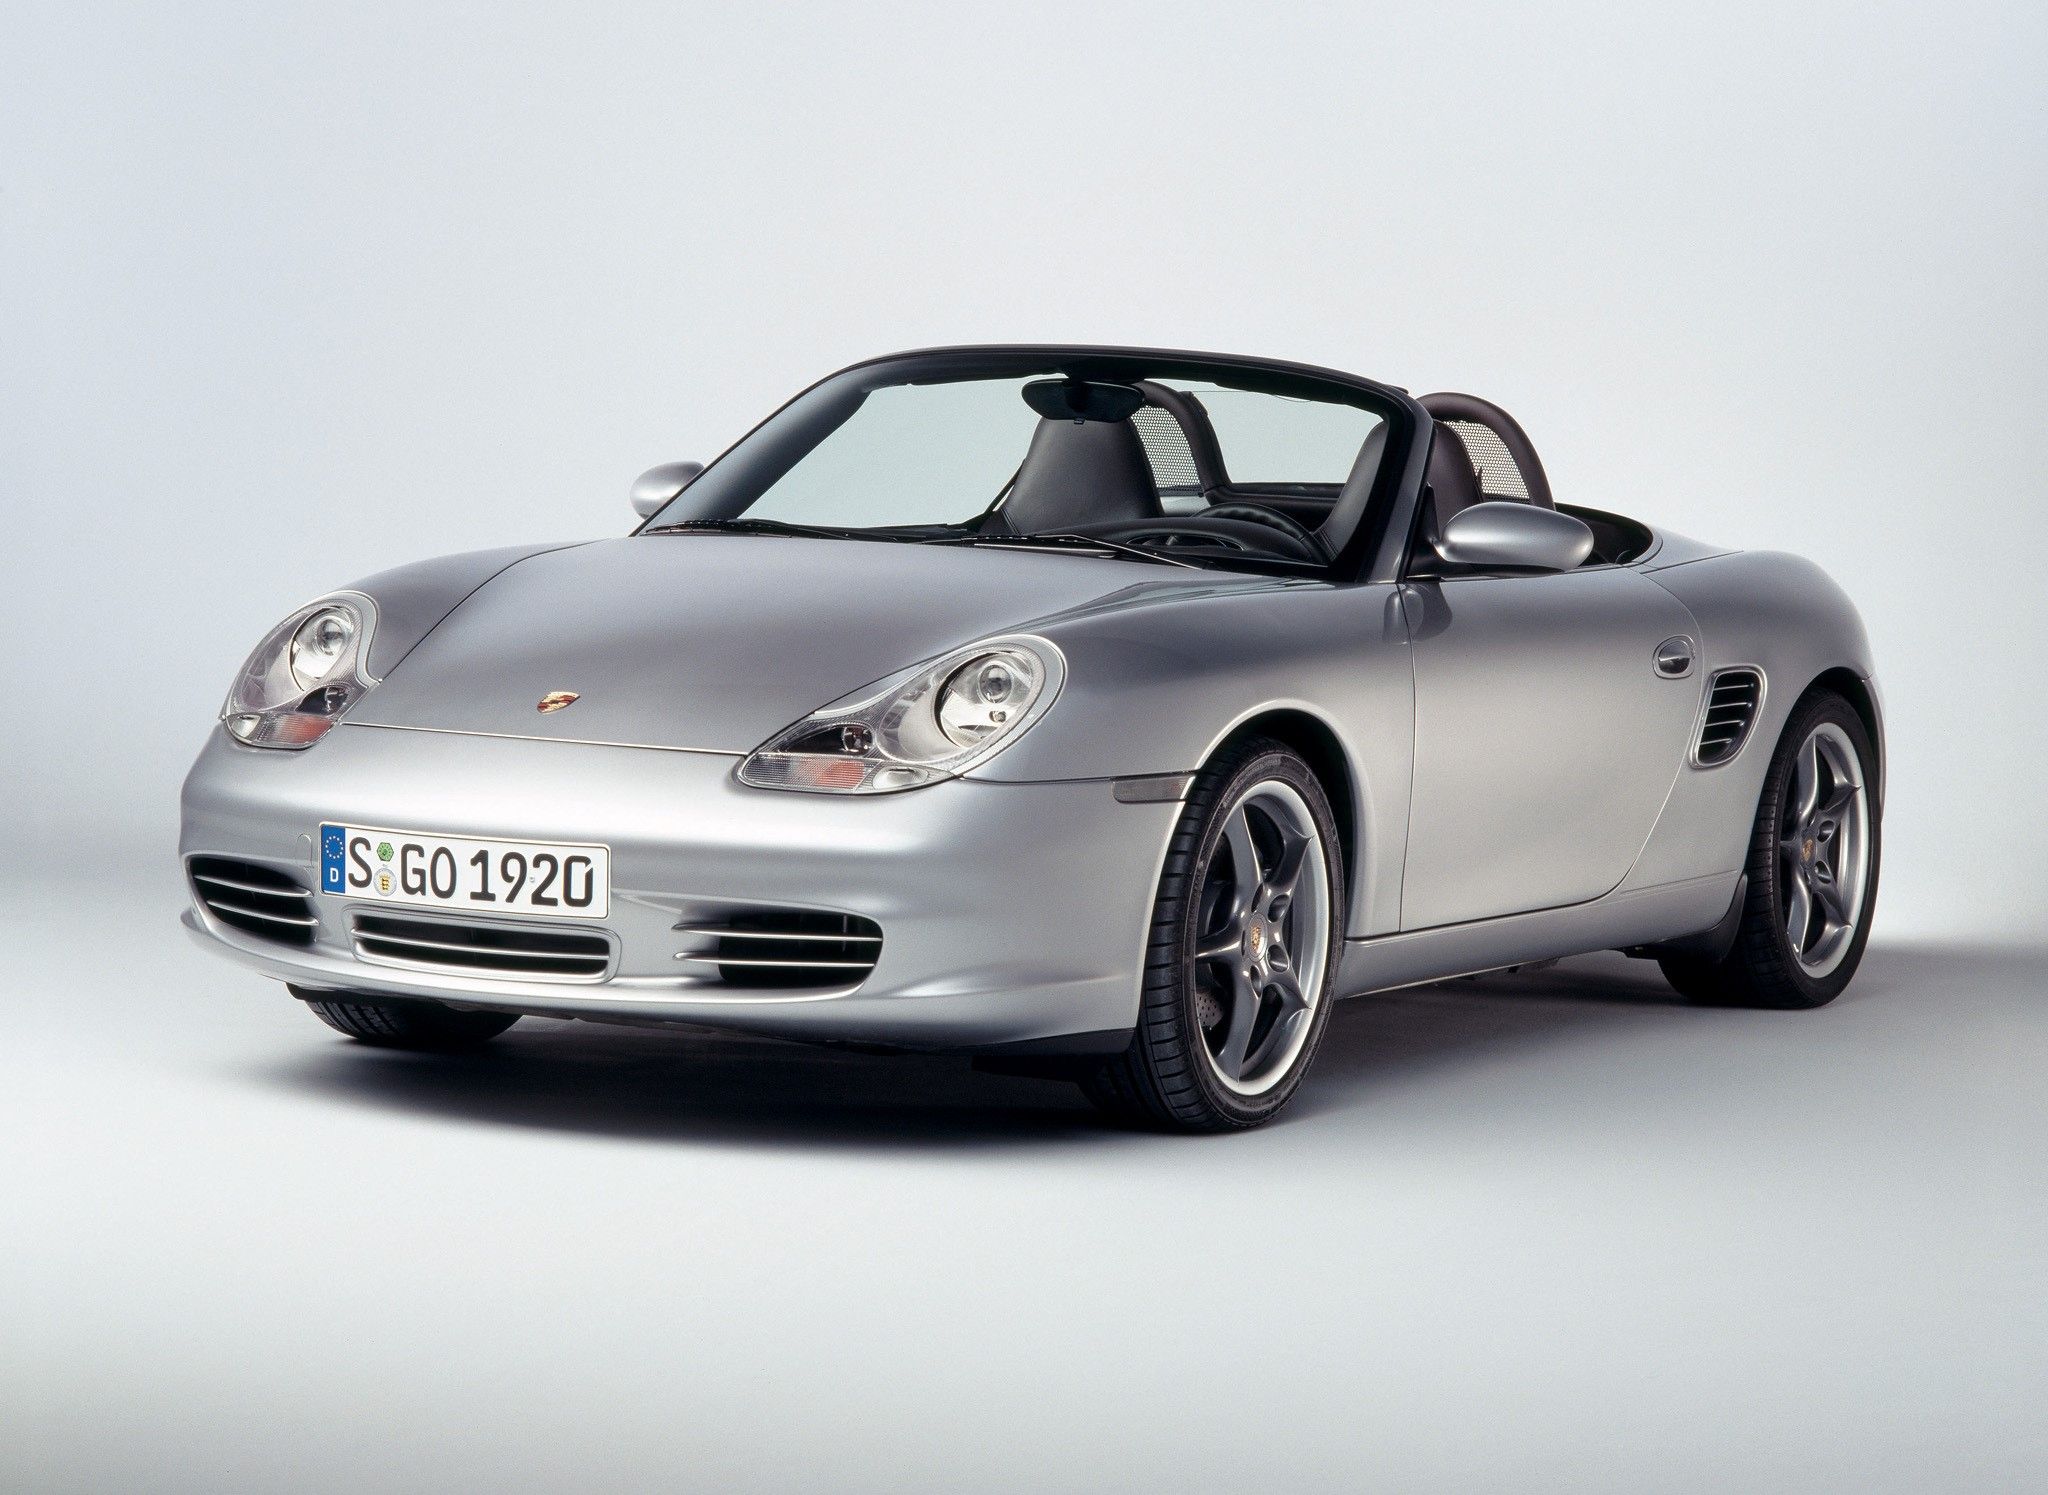 Silver Porsche Boxster from 2004, in a showroom